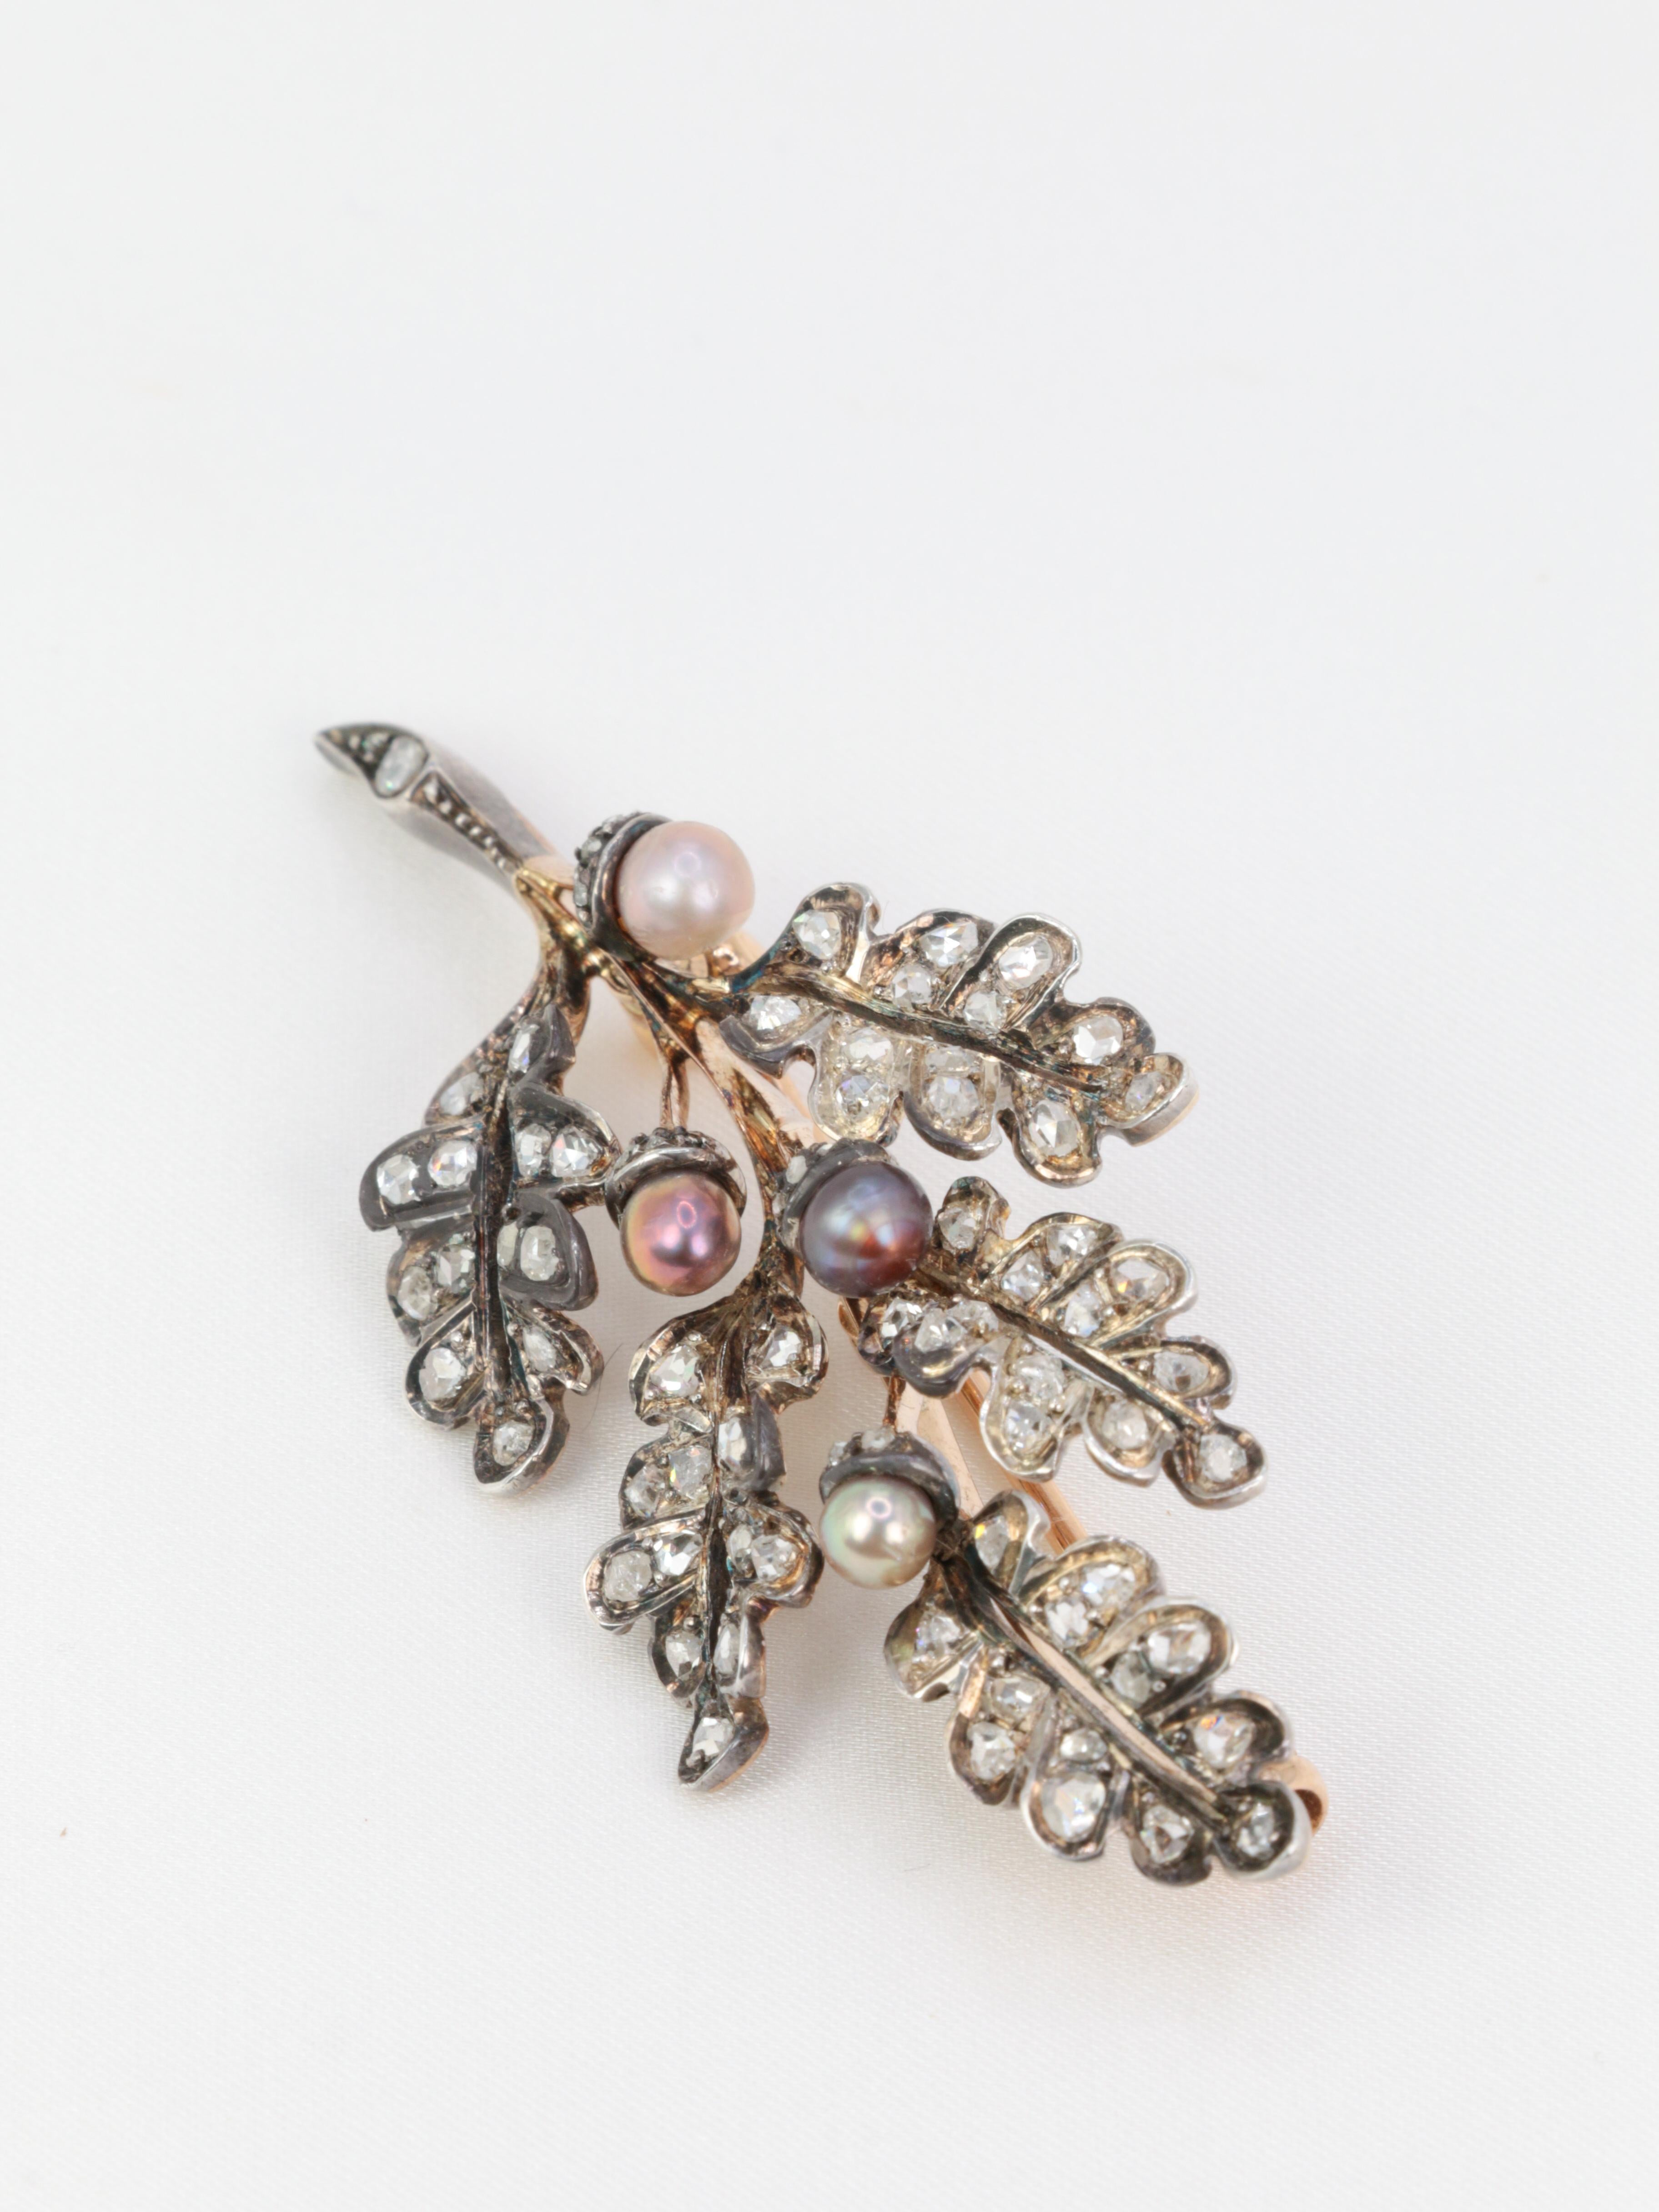 Victorian Gold, Silver, Natural Pearls and Rose-Cut Diamond Leaf Brooch, circa 4